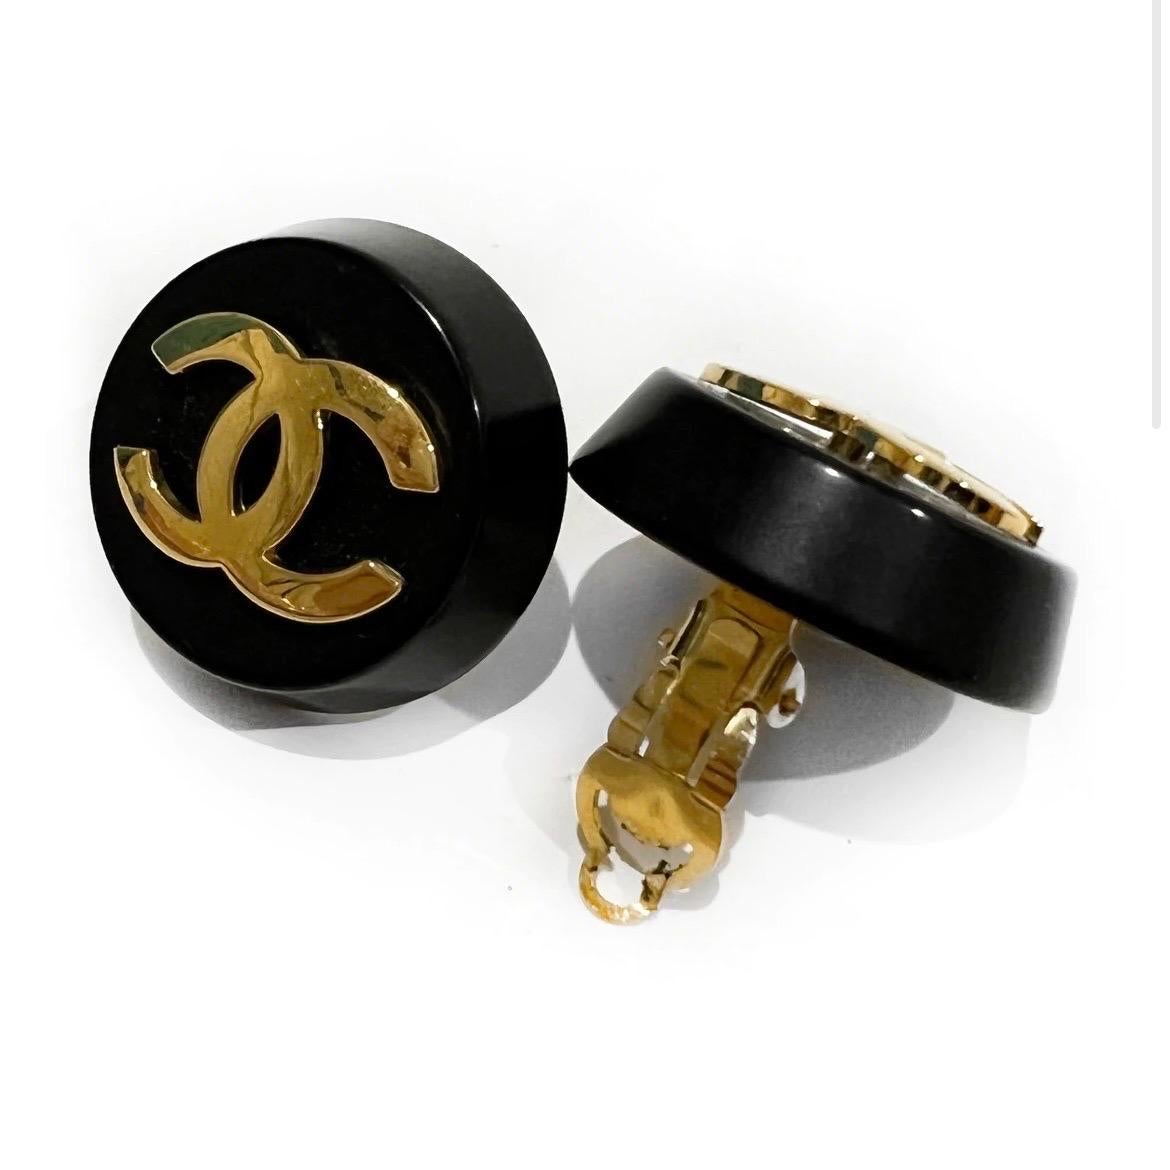 Black Circle Logo Clip On Earrings by Chanel 
Late 1980's- Early 1990's (collection 26 stamp)
Black resin sphere
Gold plated Chanel logo in center 
Made in France
Condition: Excellent vintage condition. Some small scratches on gold